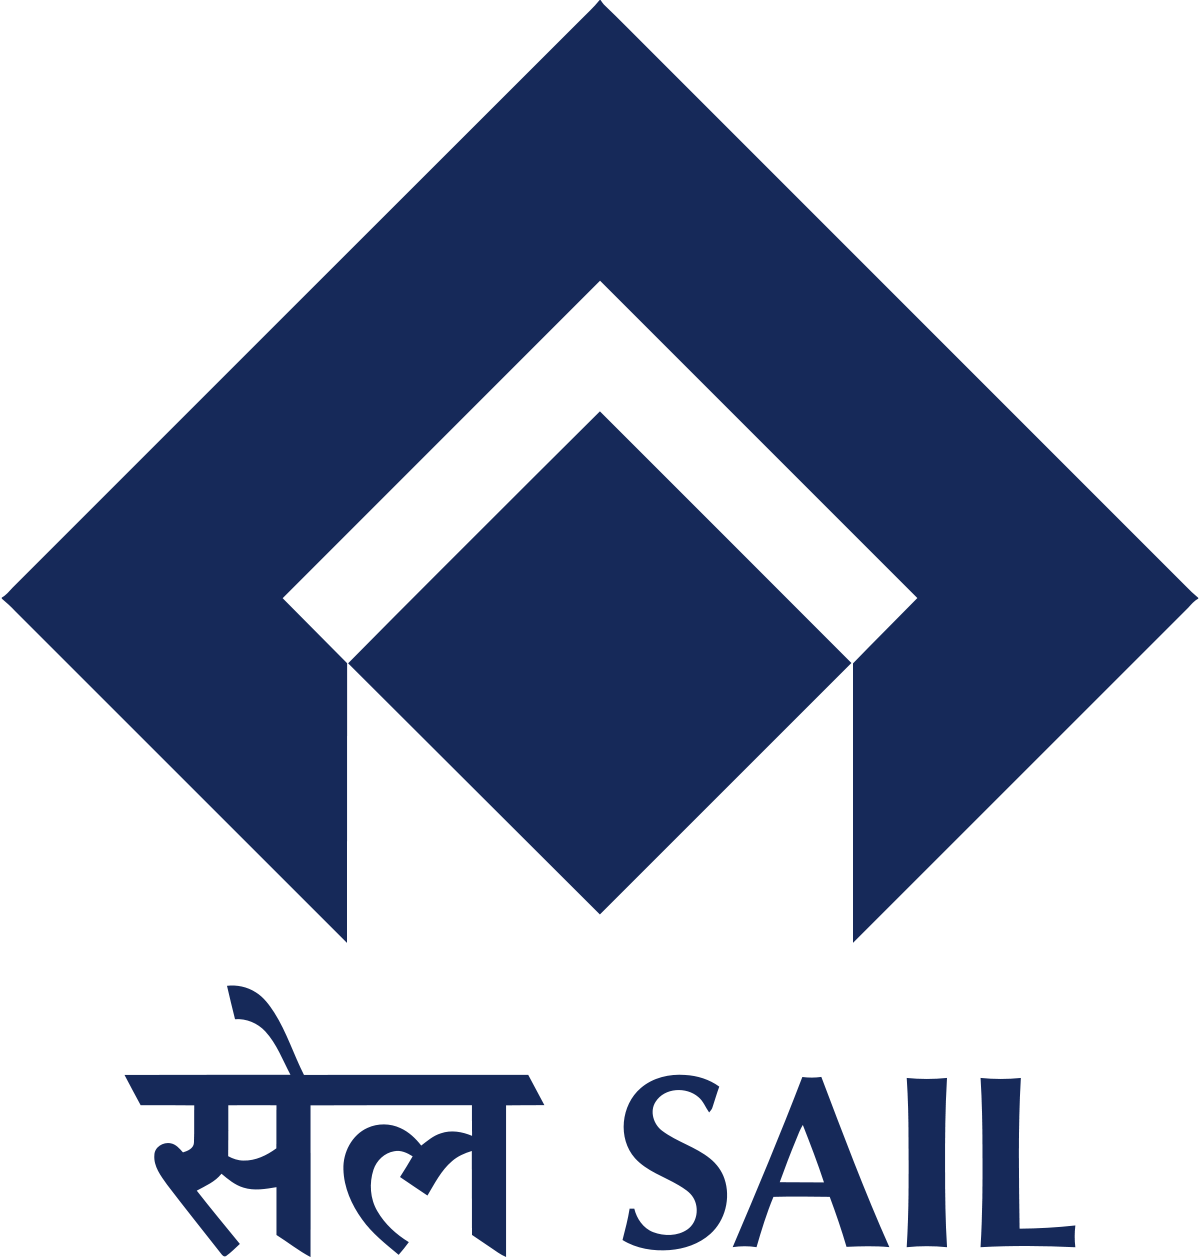 SAIL reports standalone net profit of Rs 553.69 cr against a net loss of Rs 539.06 crore last year in Q2